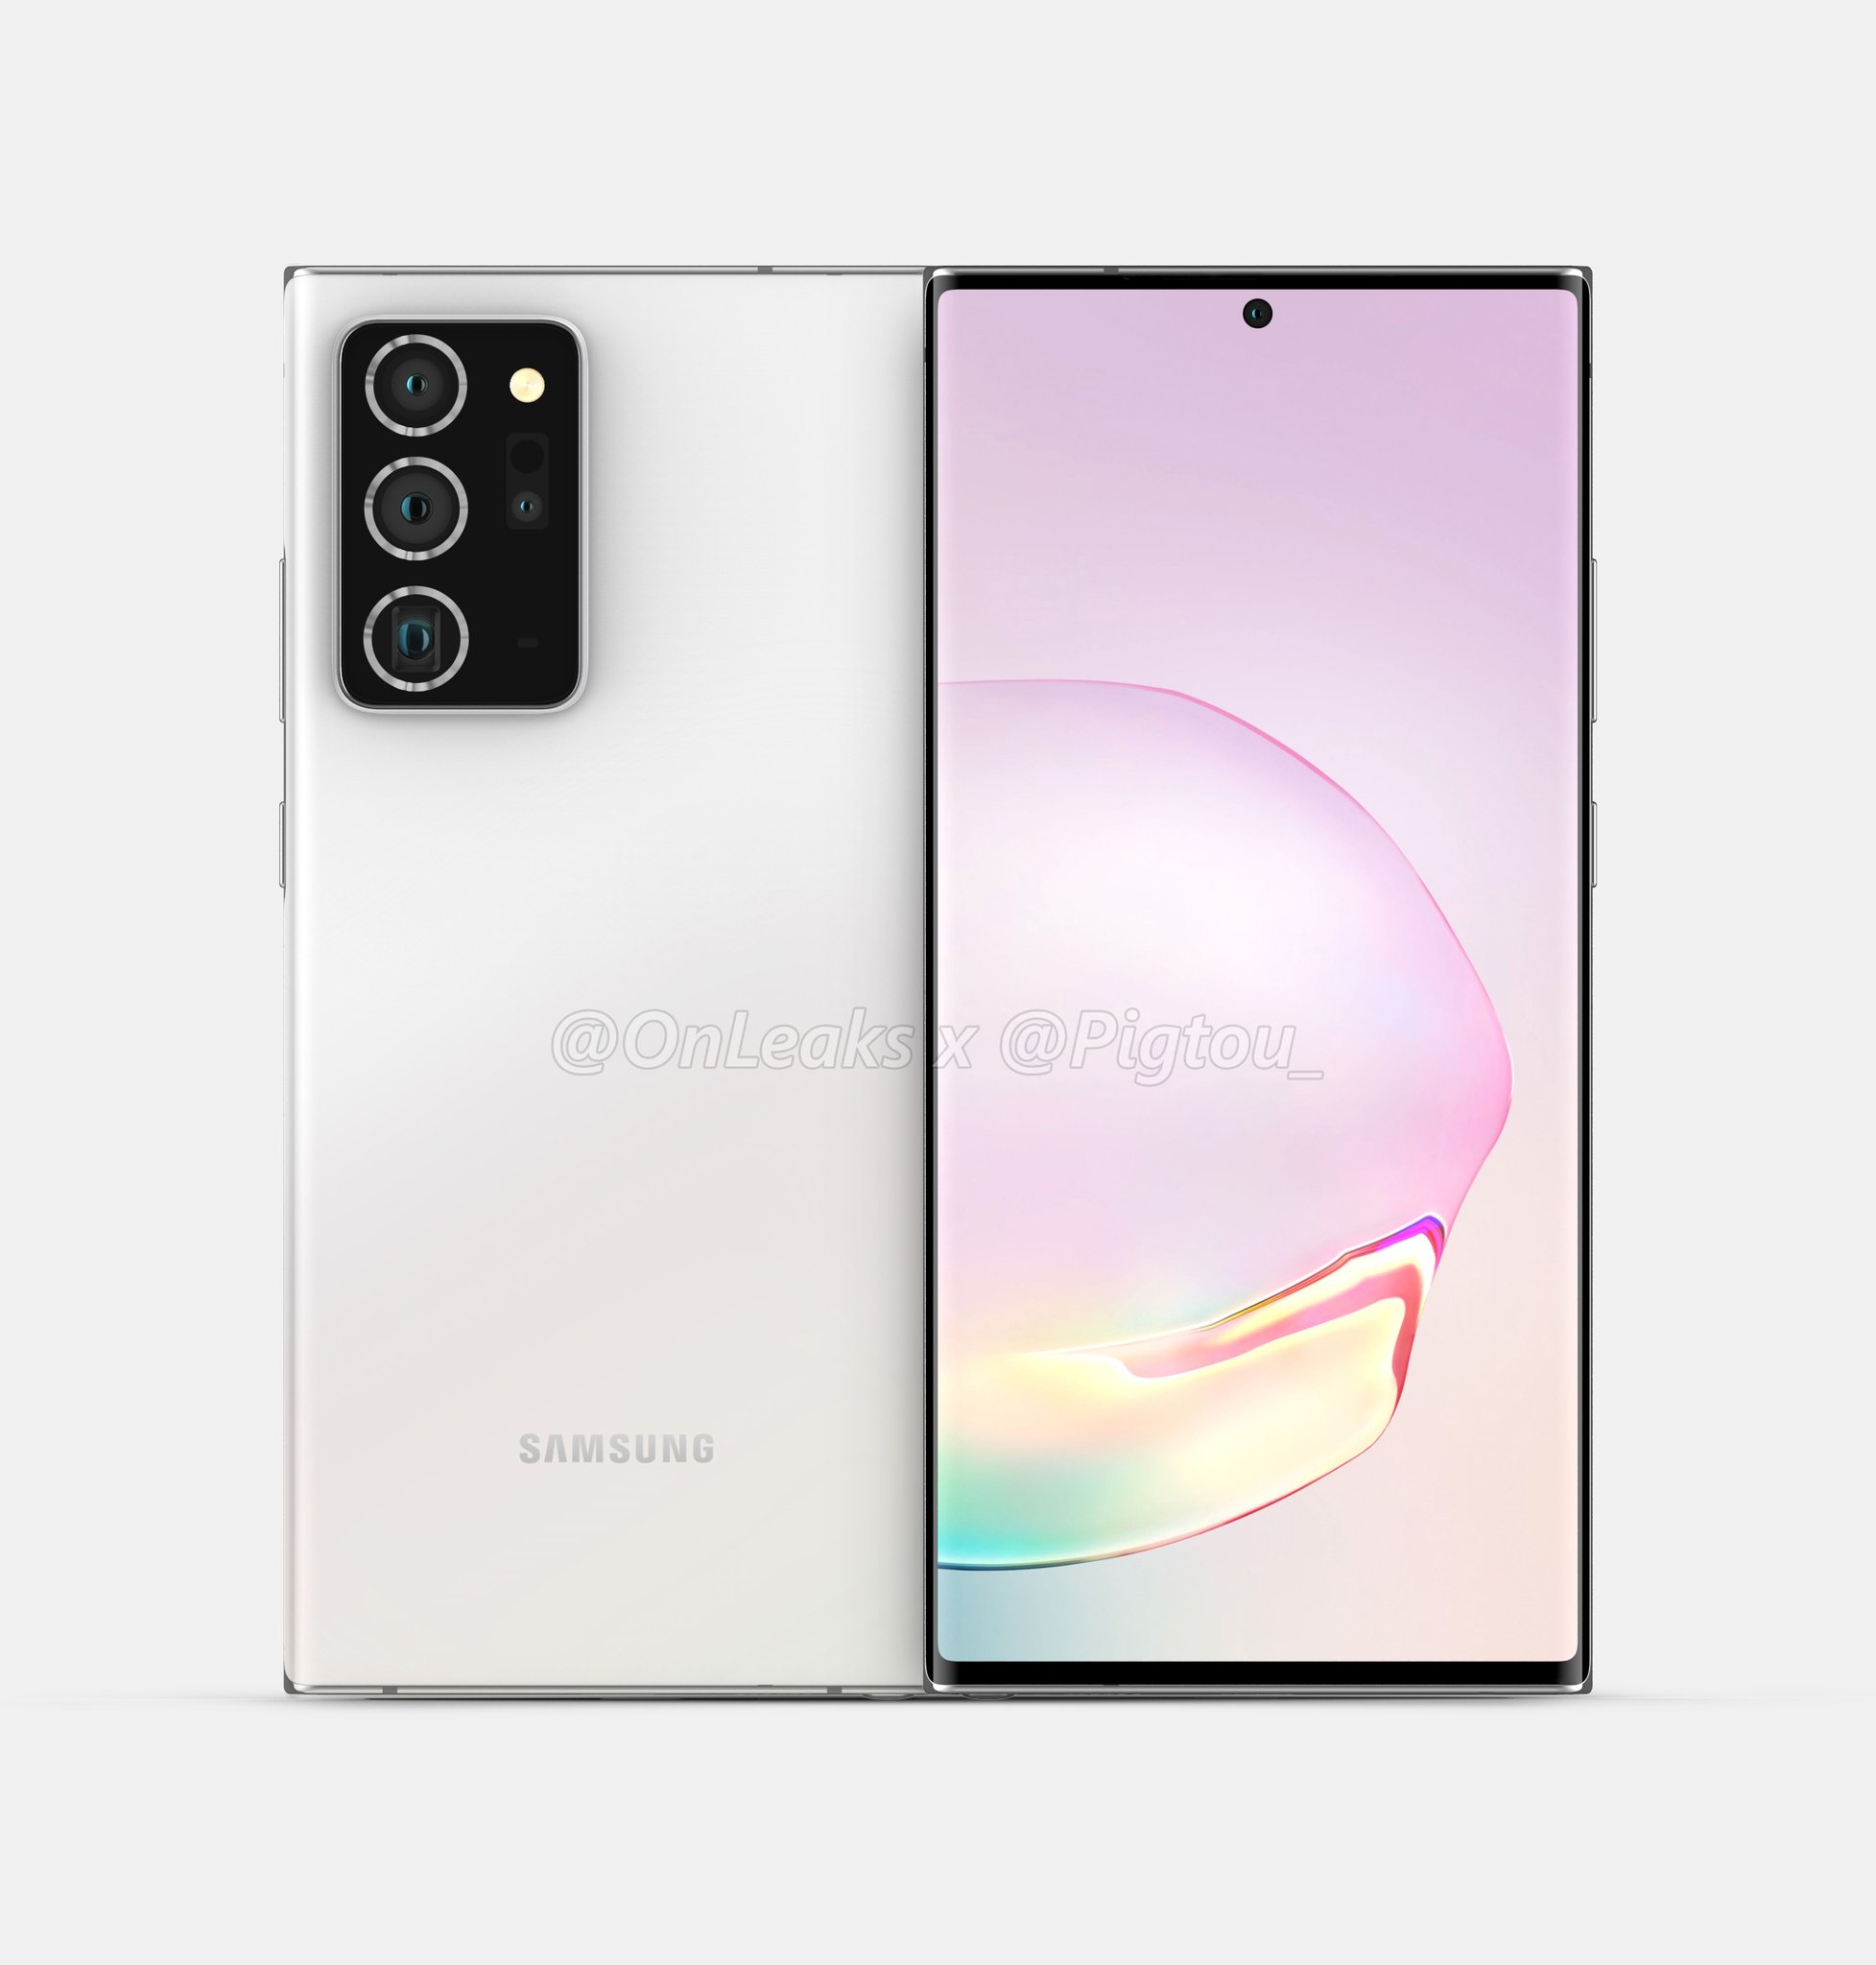 https://9to5google.com/wp-content/uploads/sites/4/2020/05/samsung_galaxy_note_20_plus_onleaks_3.jpg?quality=82&strip=all